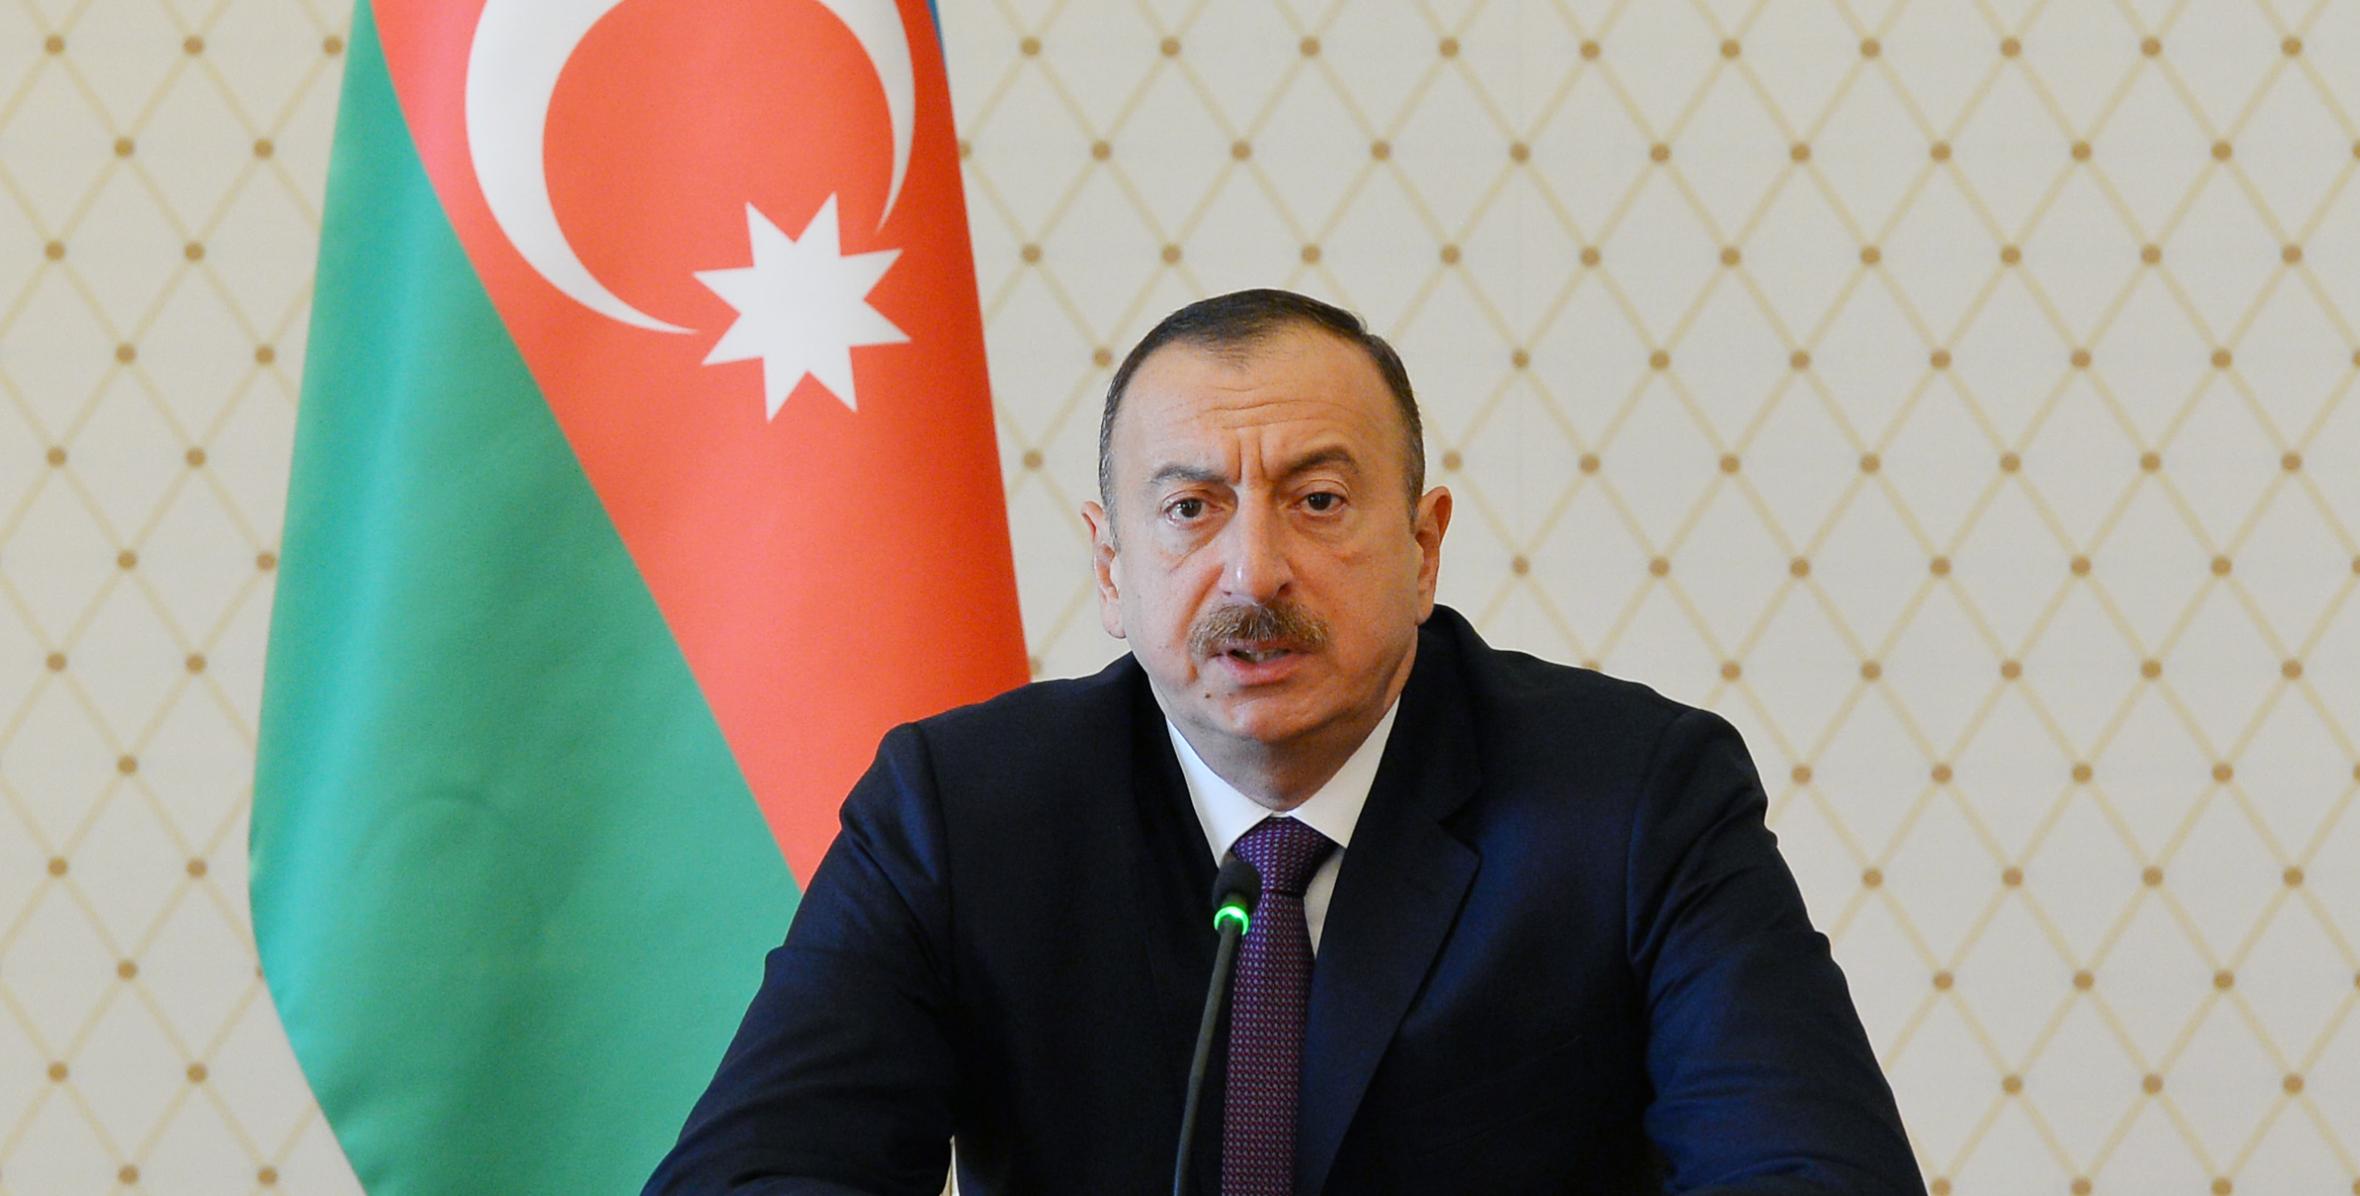 Speech by Ilham Aliyev at the reception of the heads of diplomatic missions and international organizations of Muslim countries in Azerbaijan on the occasion of the holy month of Ramadan